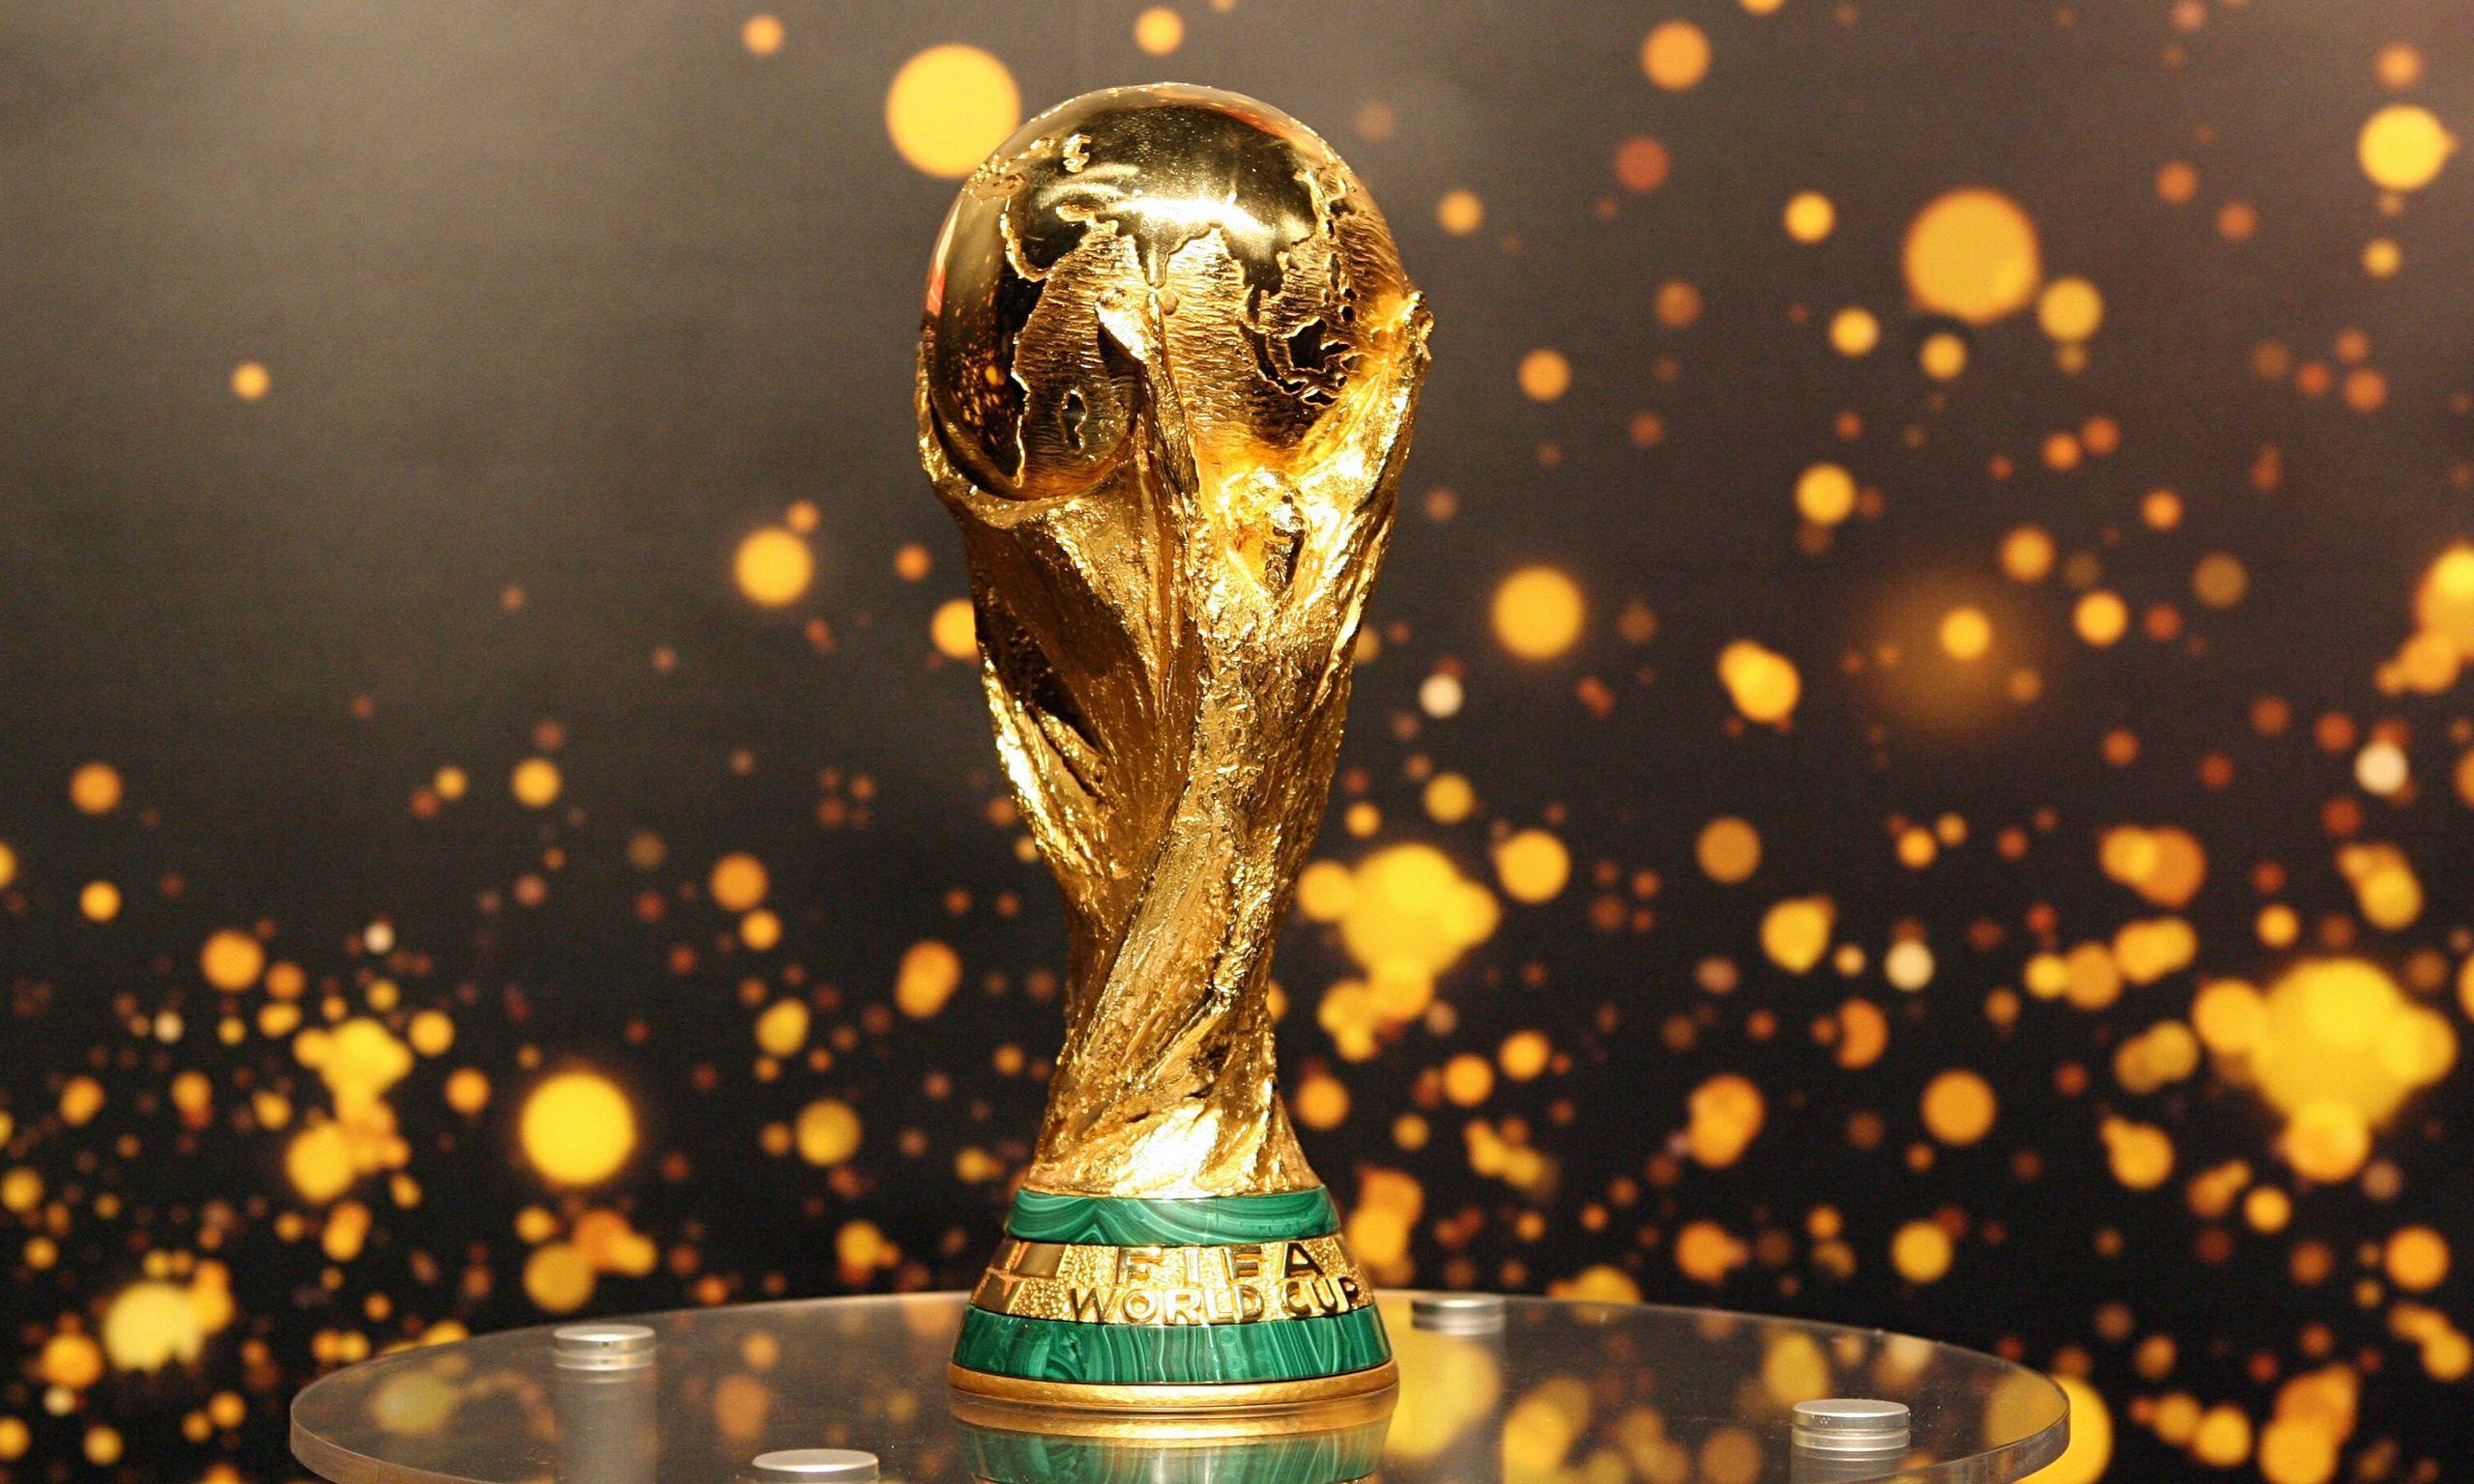 FIFA World Cup Trophy 2022 Qatar Wallpapers - Top 15 Best FIFA World Cup  Trophy 2022 Qatar Wallpapers Download